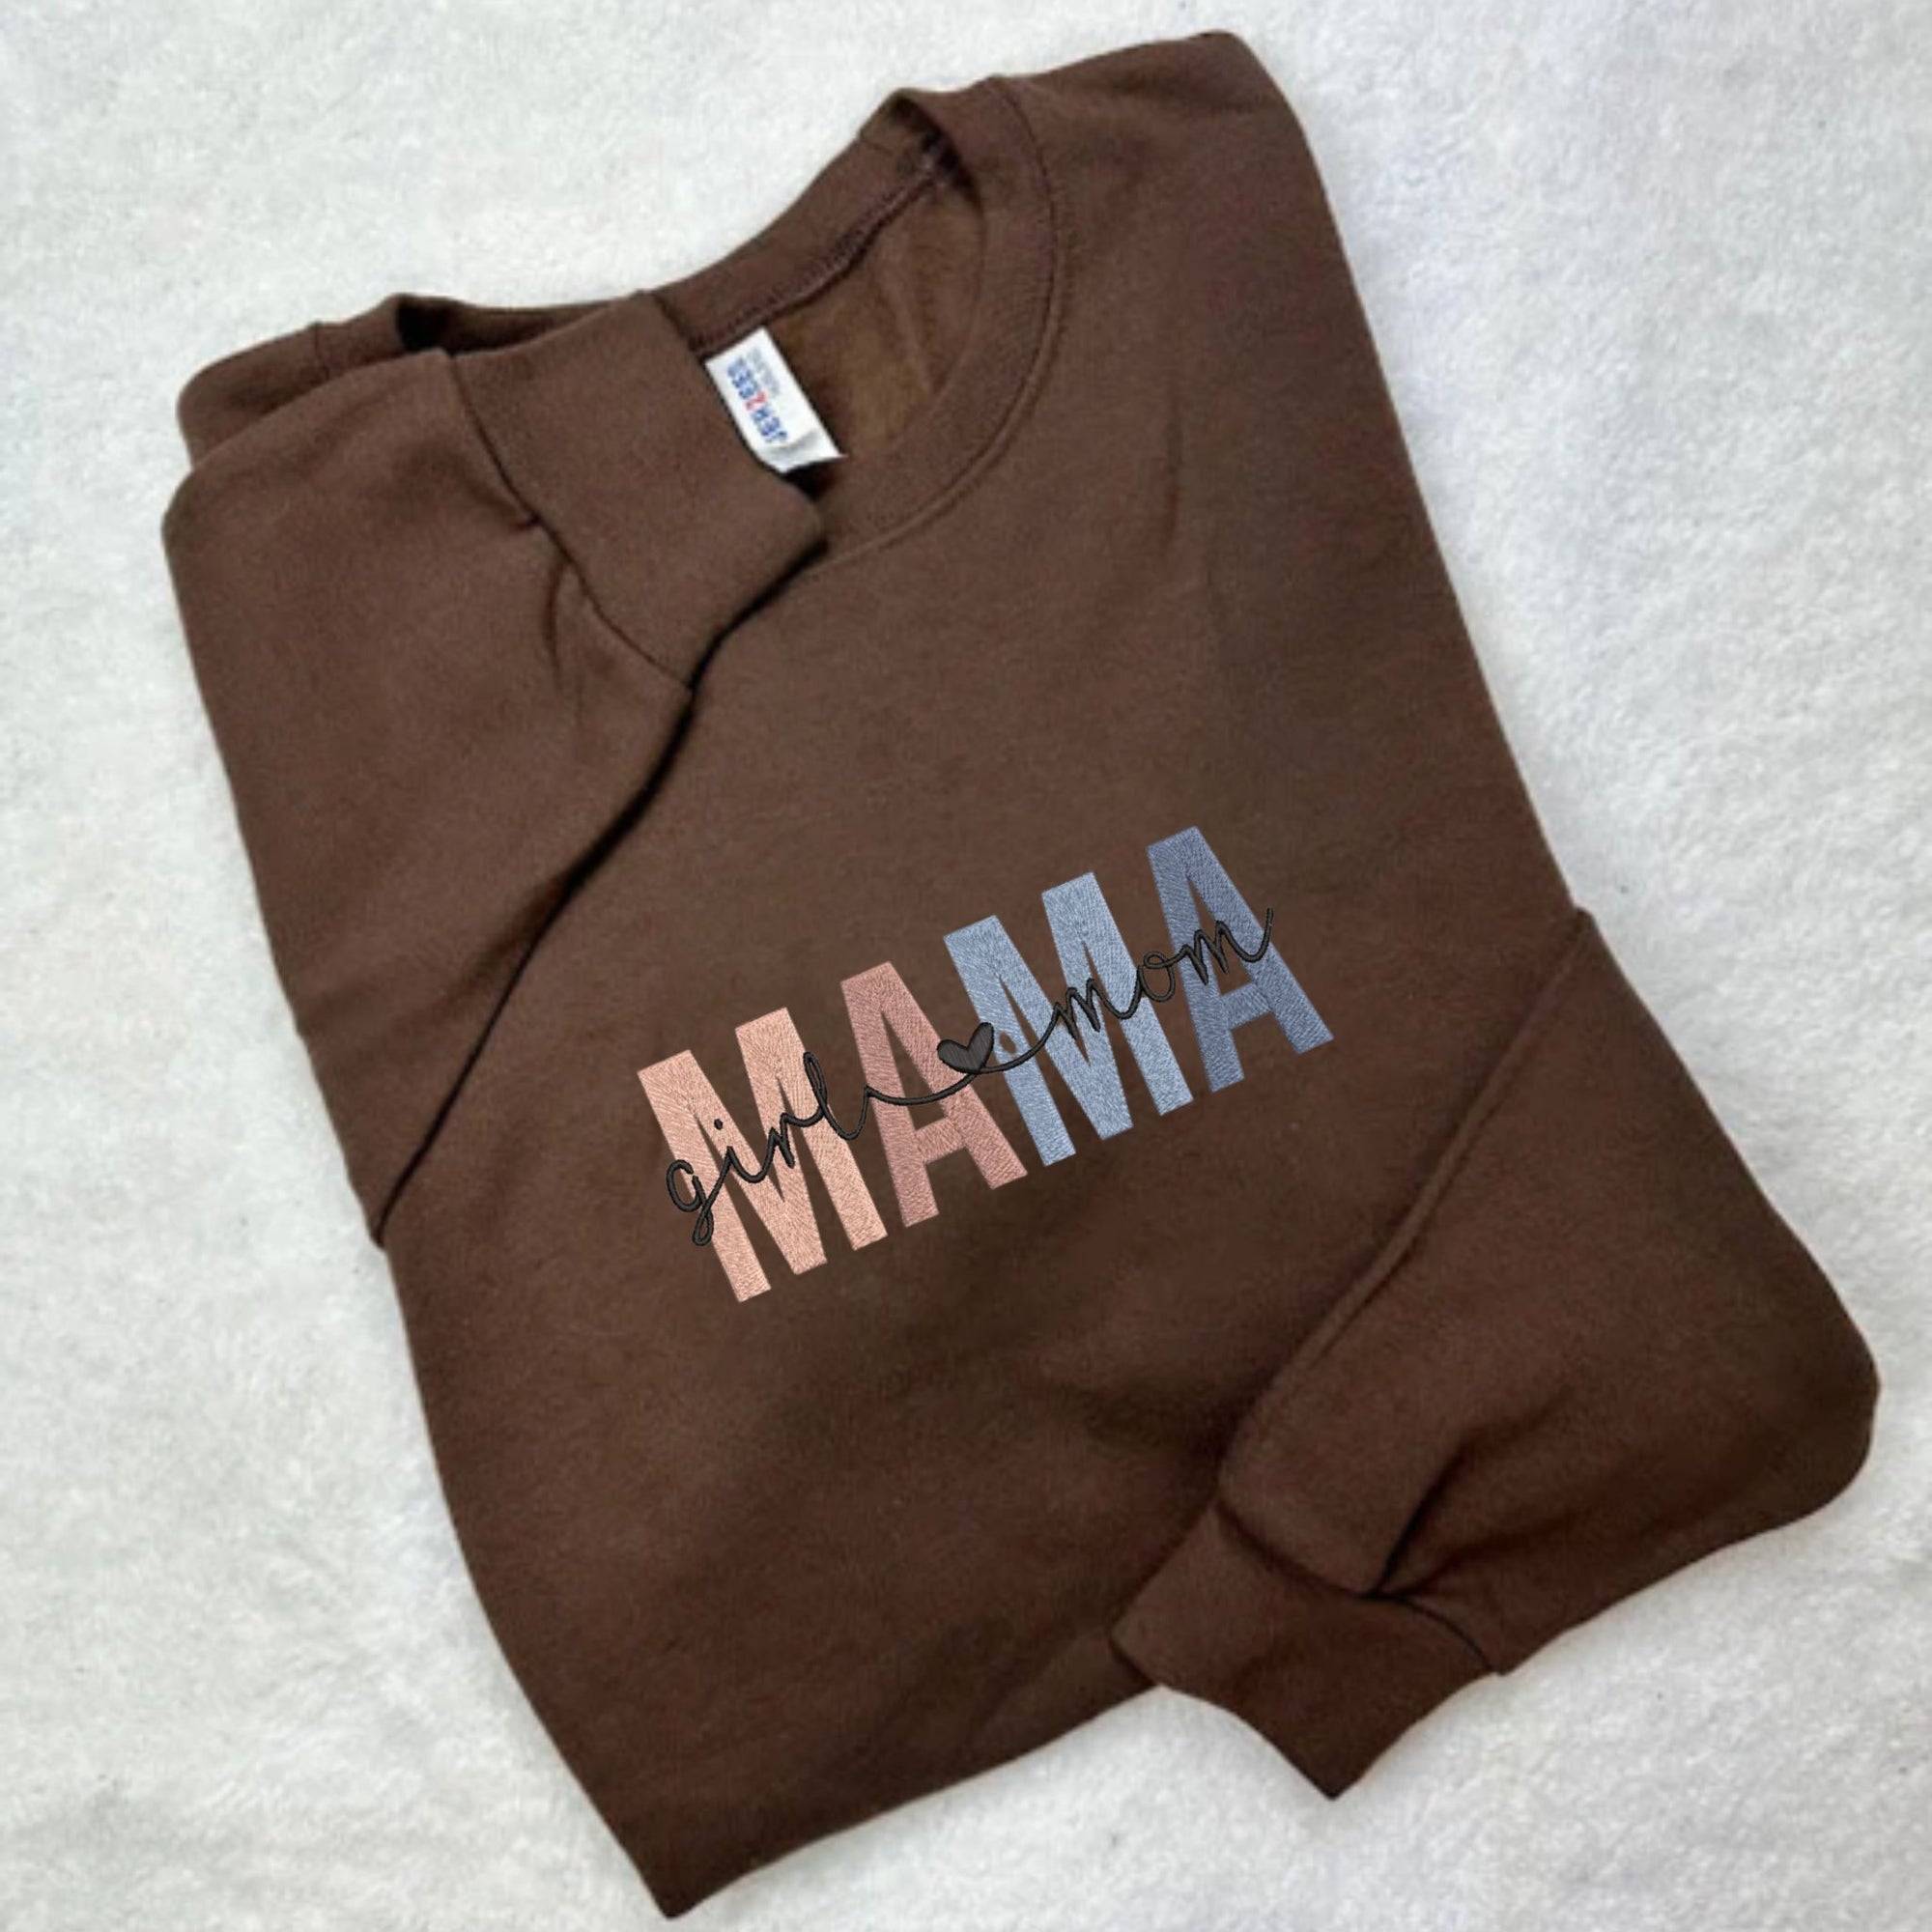 Boy Mama Embroidery Sweatshirt, Best Gift For Mother's Day From Son, Mother's Day Gift Ideas